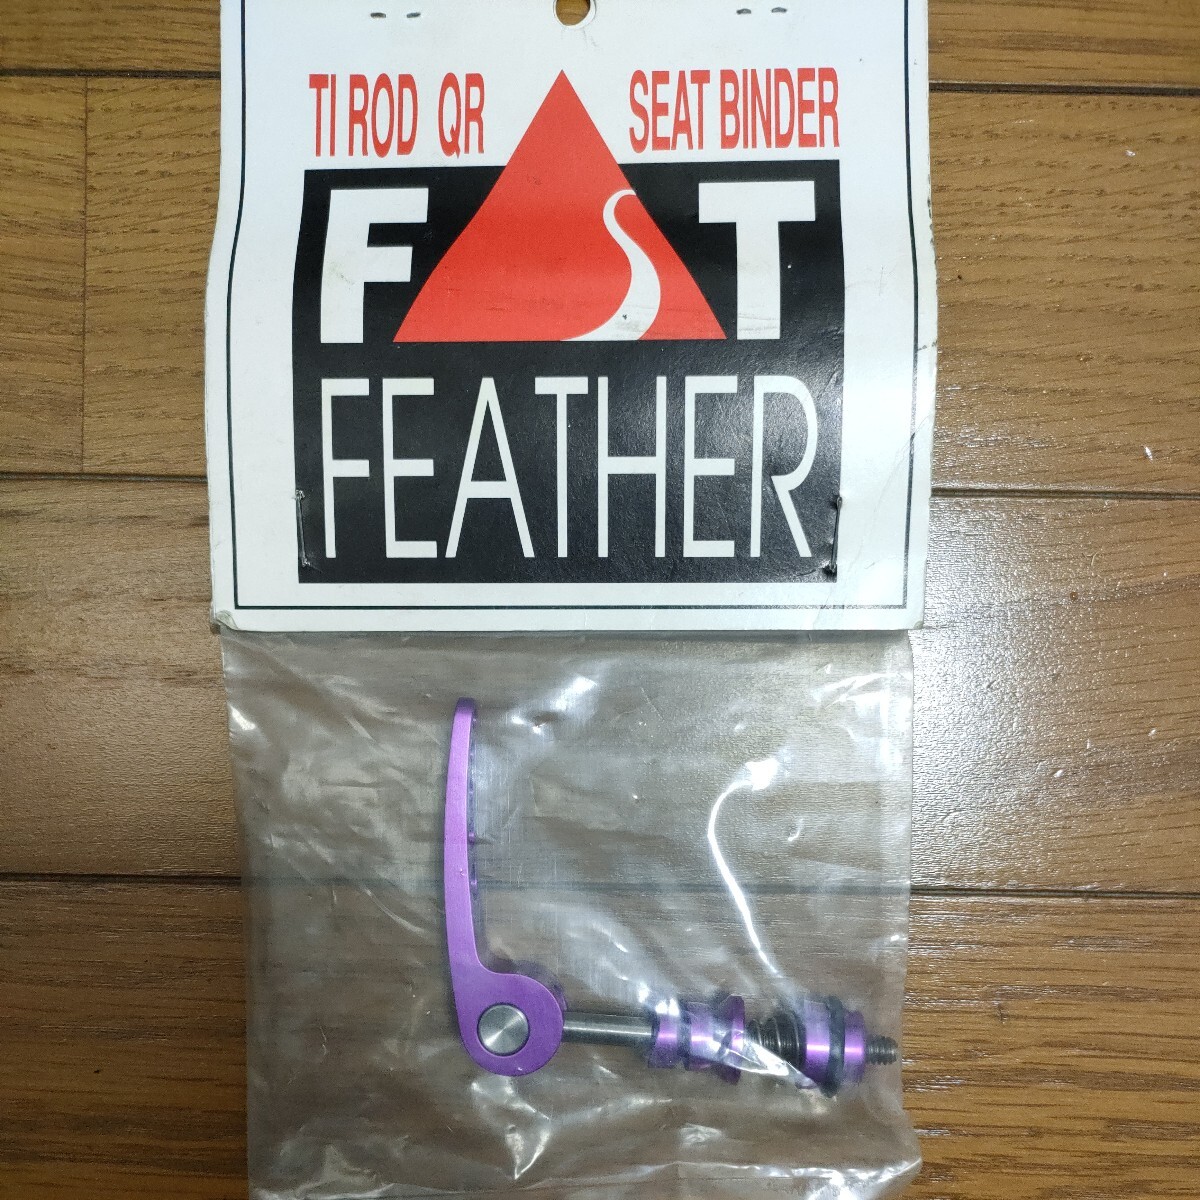  valuable *FAT FEATHERfato feather seat Quick skewer usa made America made oldmtb Old mountain bike paul Vintage purple 